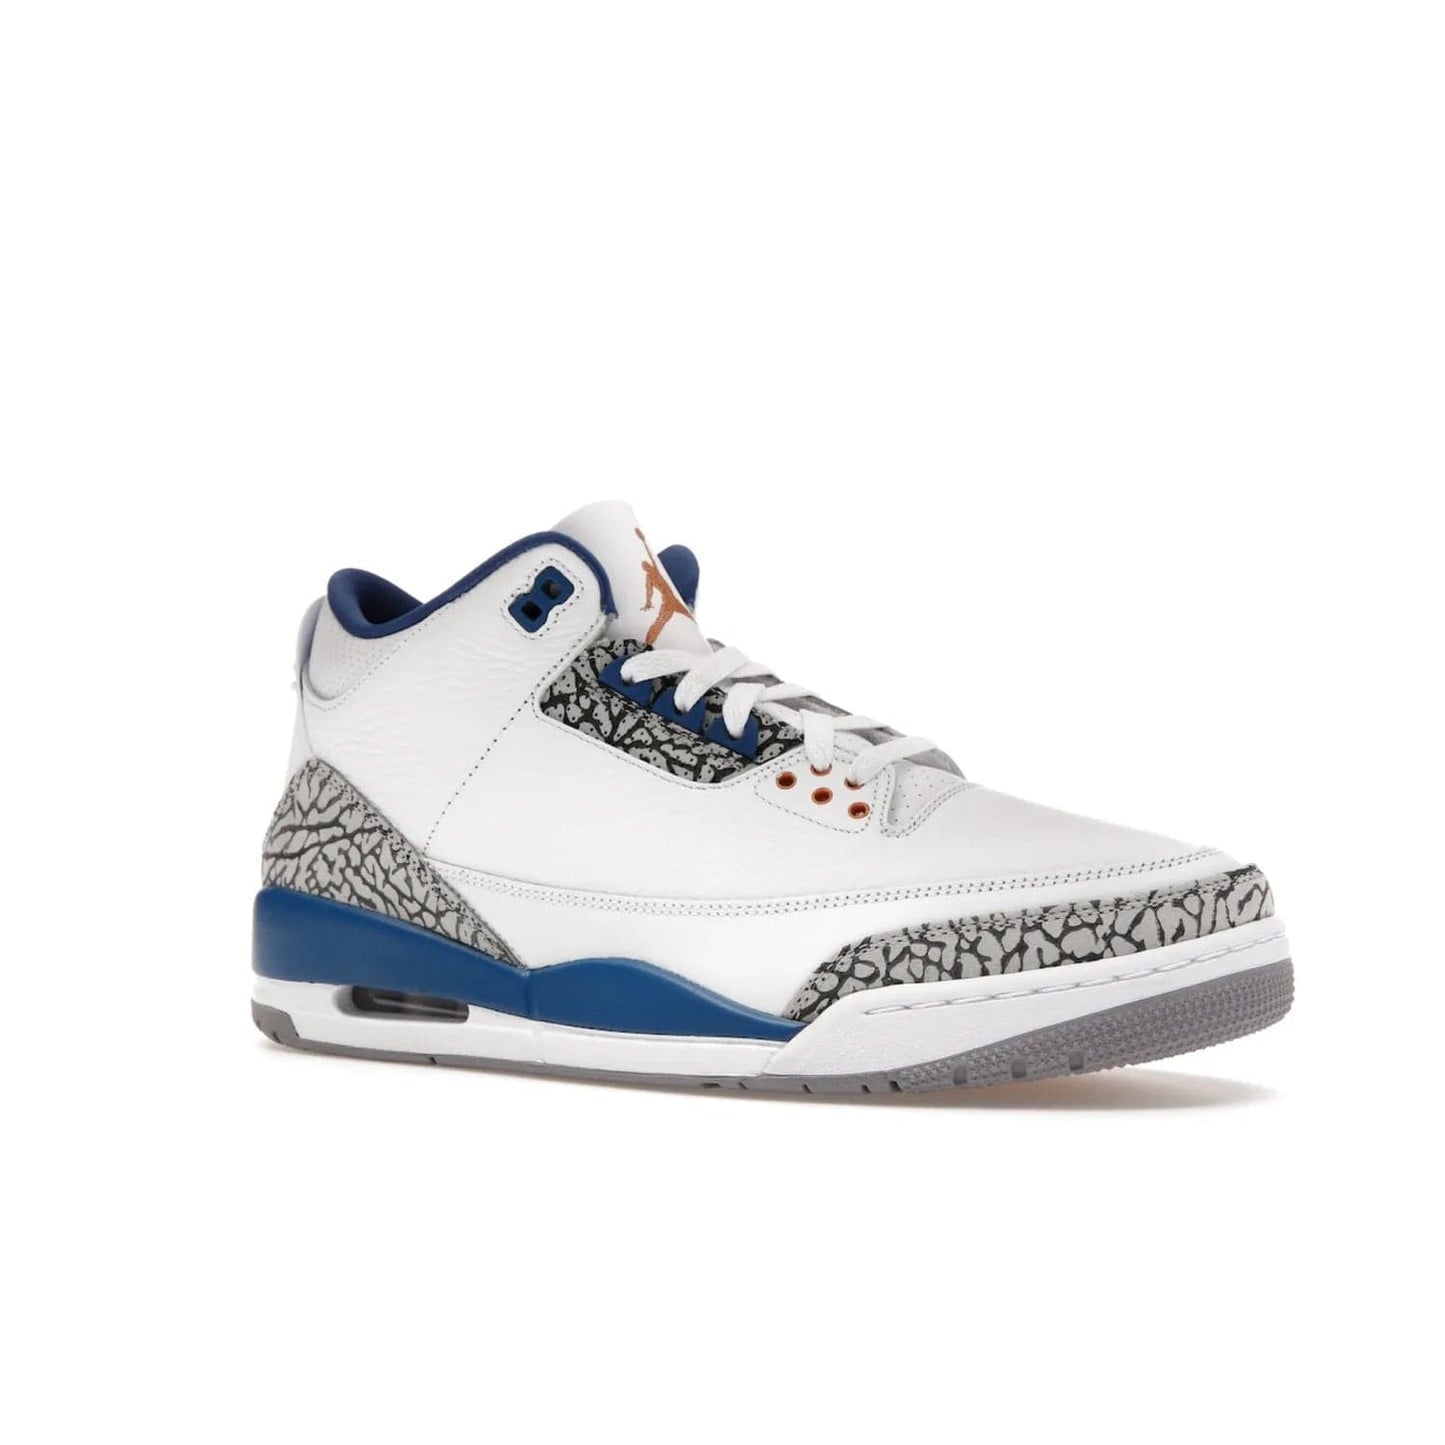 Jordan 3 Retro Wizards - Image 4 - Only at www.BallersClubKickz.com - ##
Special tribute sneaker from Jordan Brand to Michael Jordan's time with the Washington Wizards. Iconic white upper, orange Jumpman logo, blue accents, metallic copper details, and cement grey outsole. Buy the Air Jordan 3 Retro Wizards April 29, 2023.